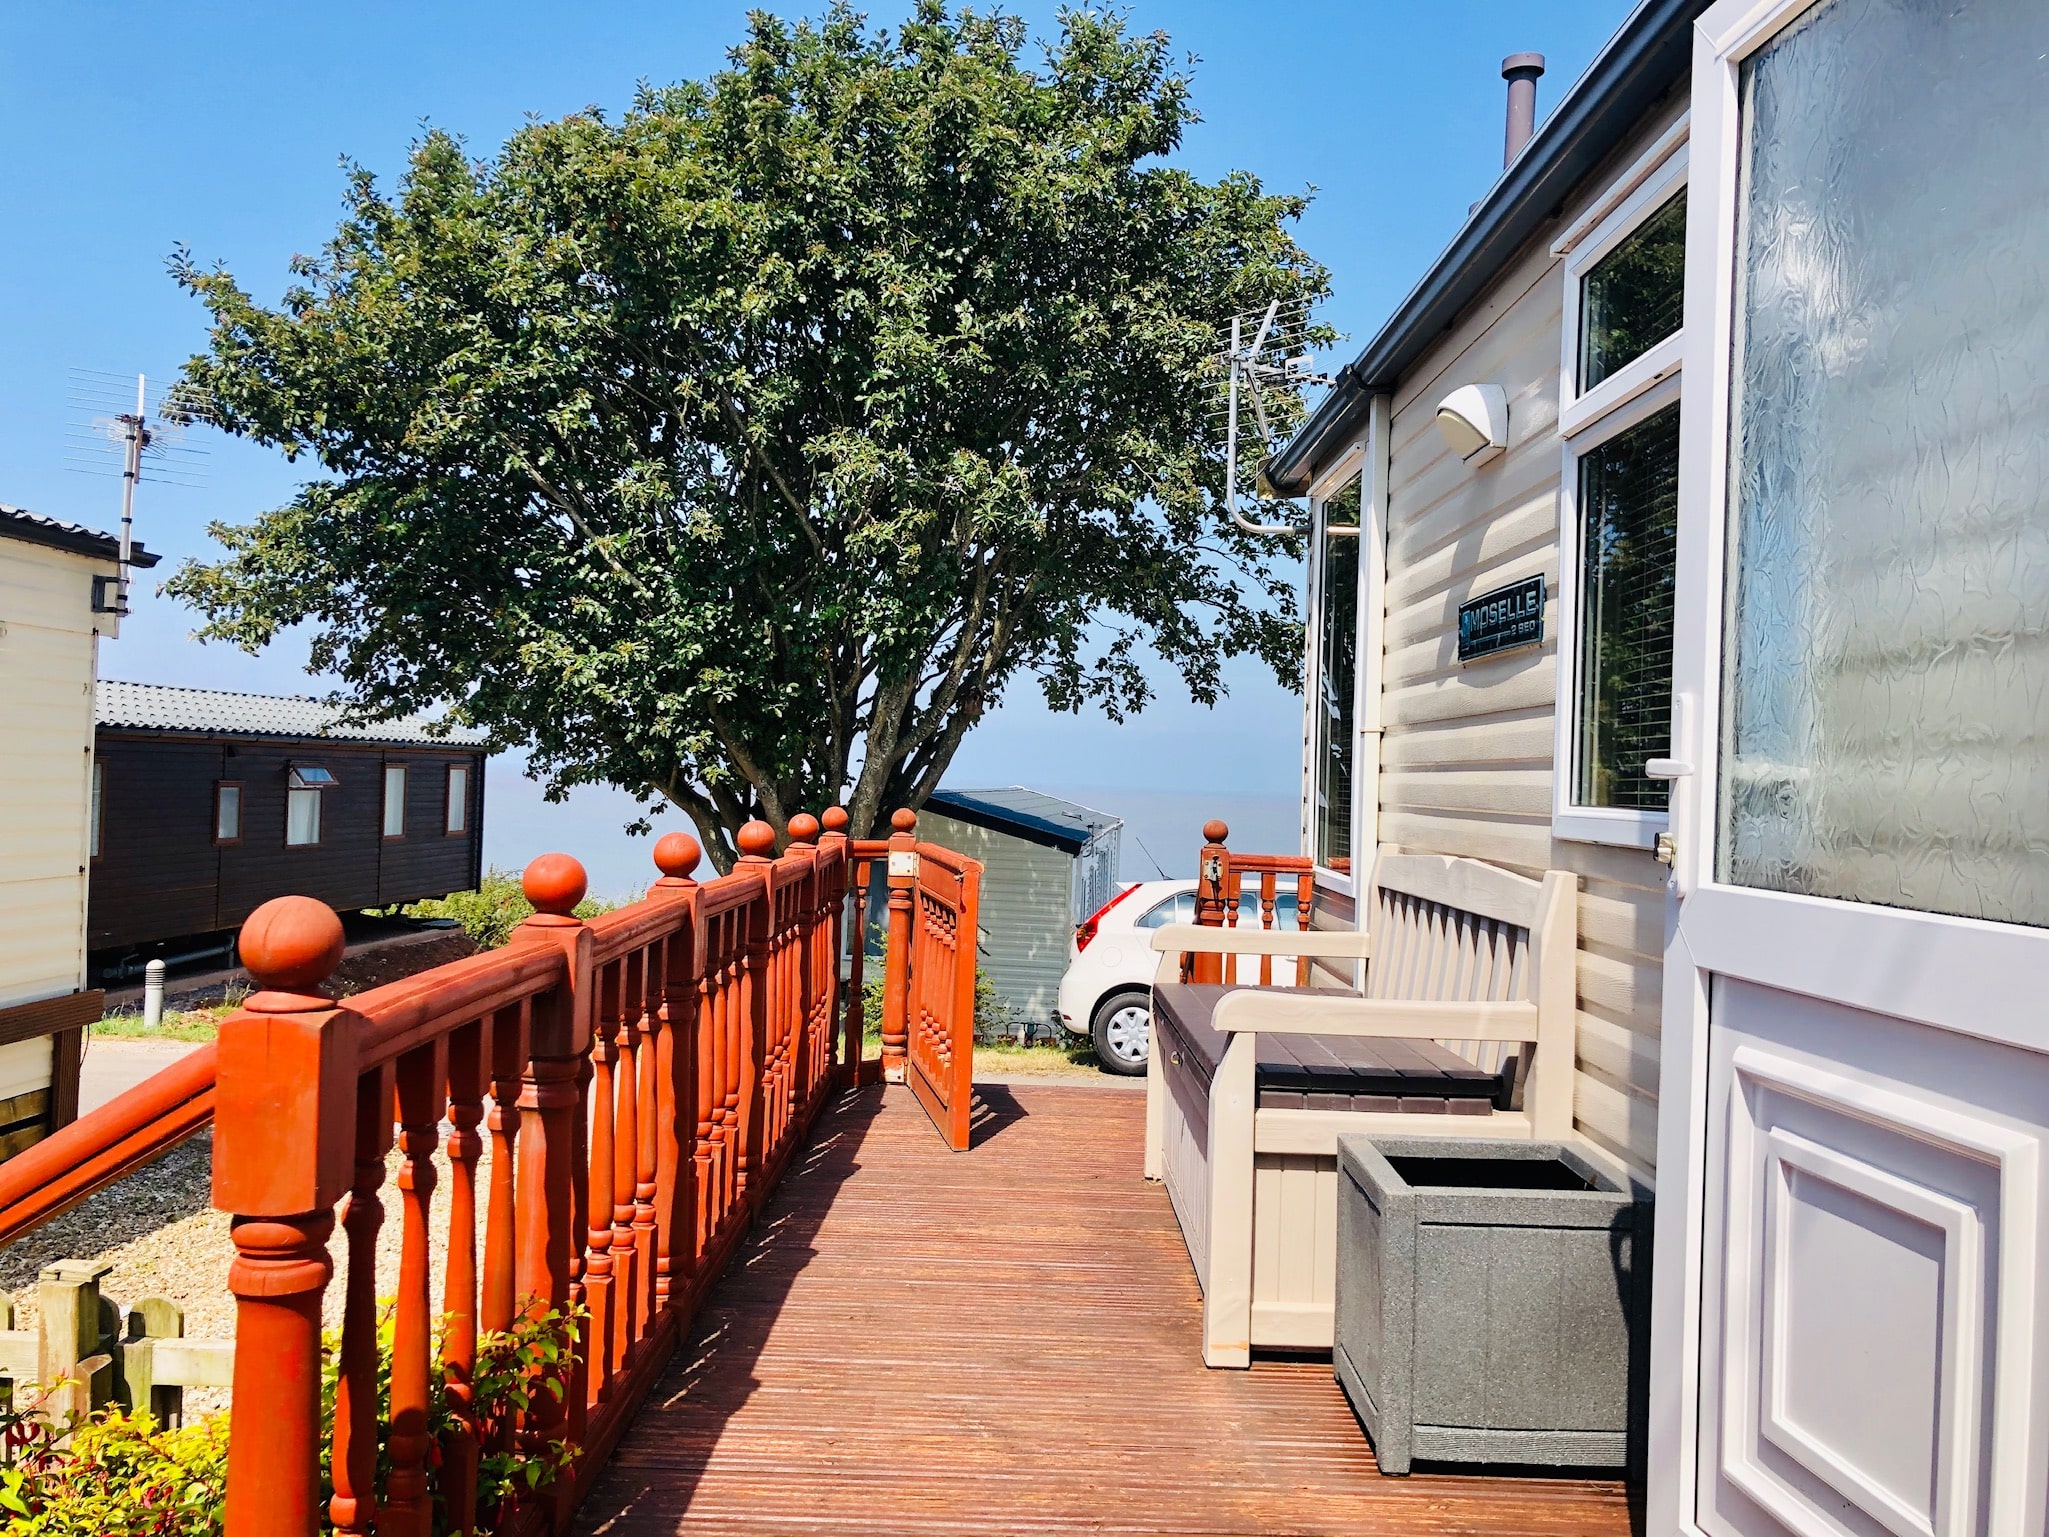 Used caravan for sale at St Audries Bay Holiday Club, Somerset